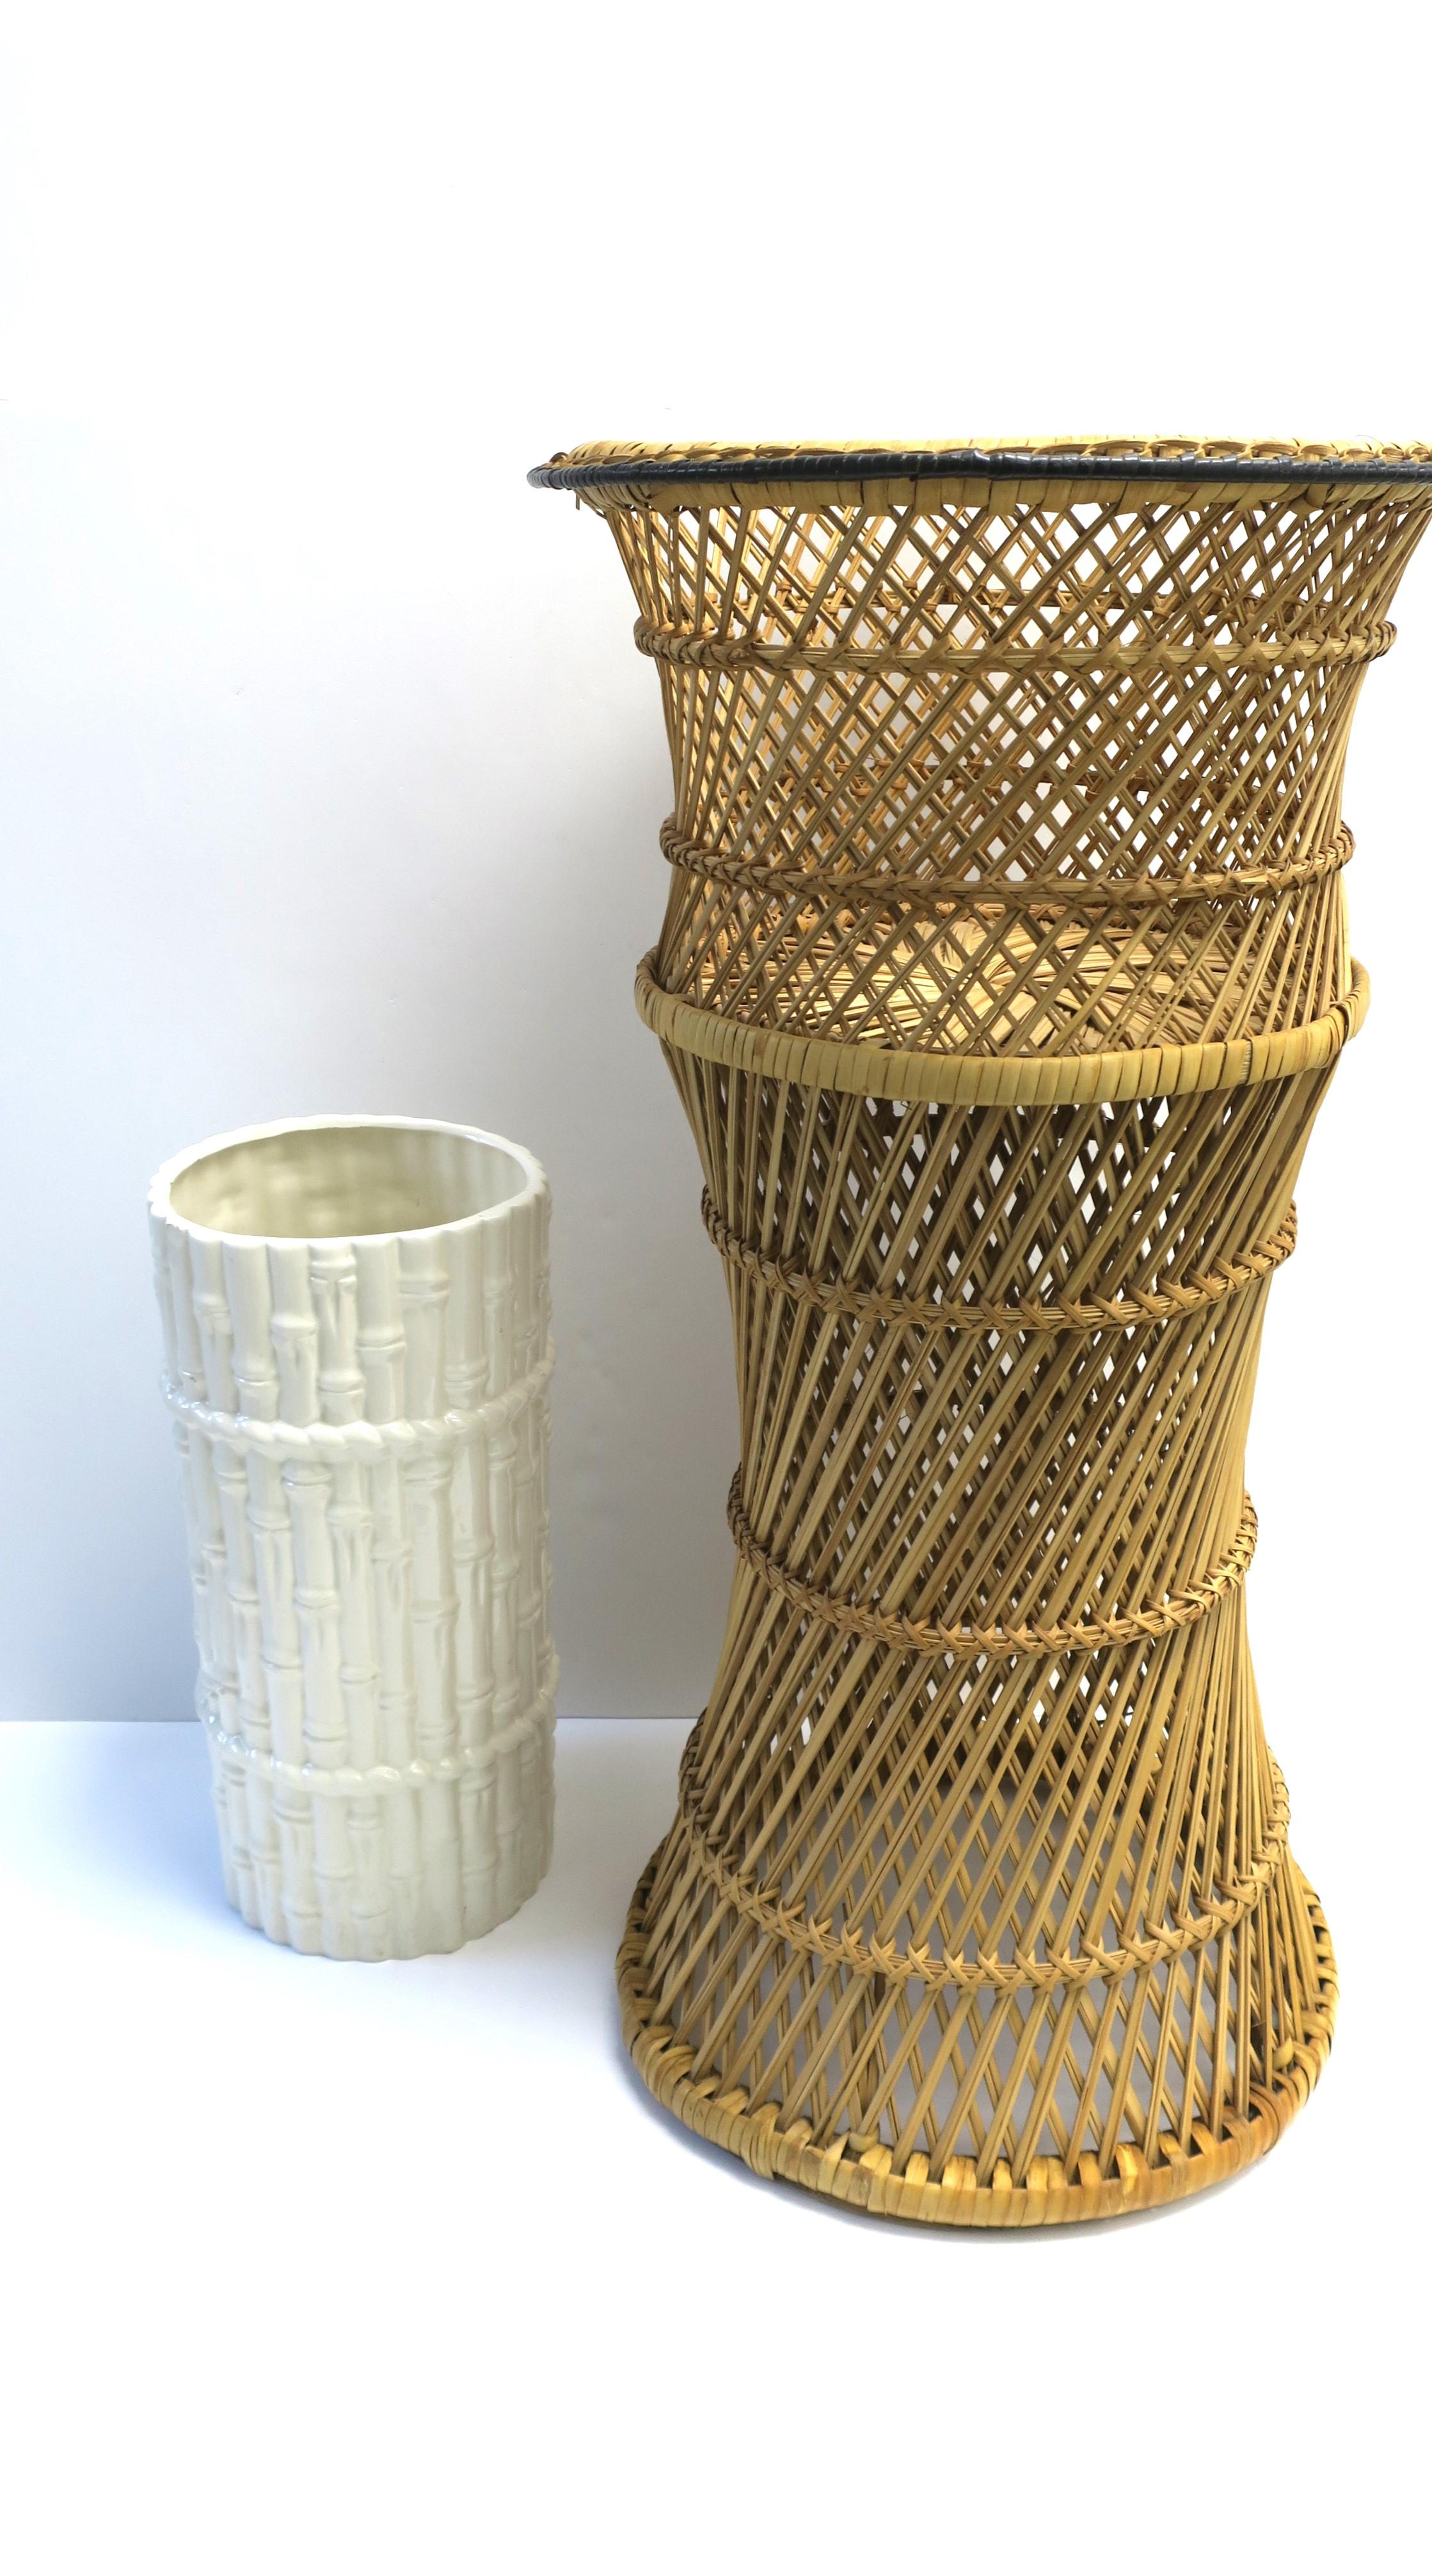 20th Century Umbrella Holder Stand with Bamboo Design, circa 1980s For Sale